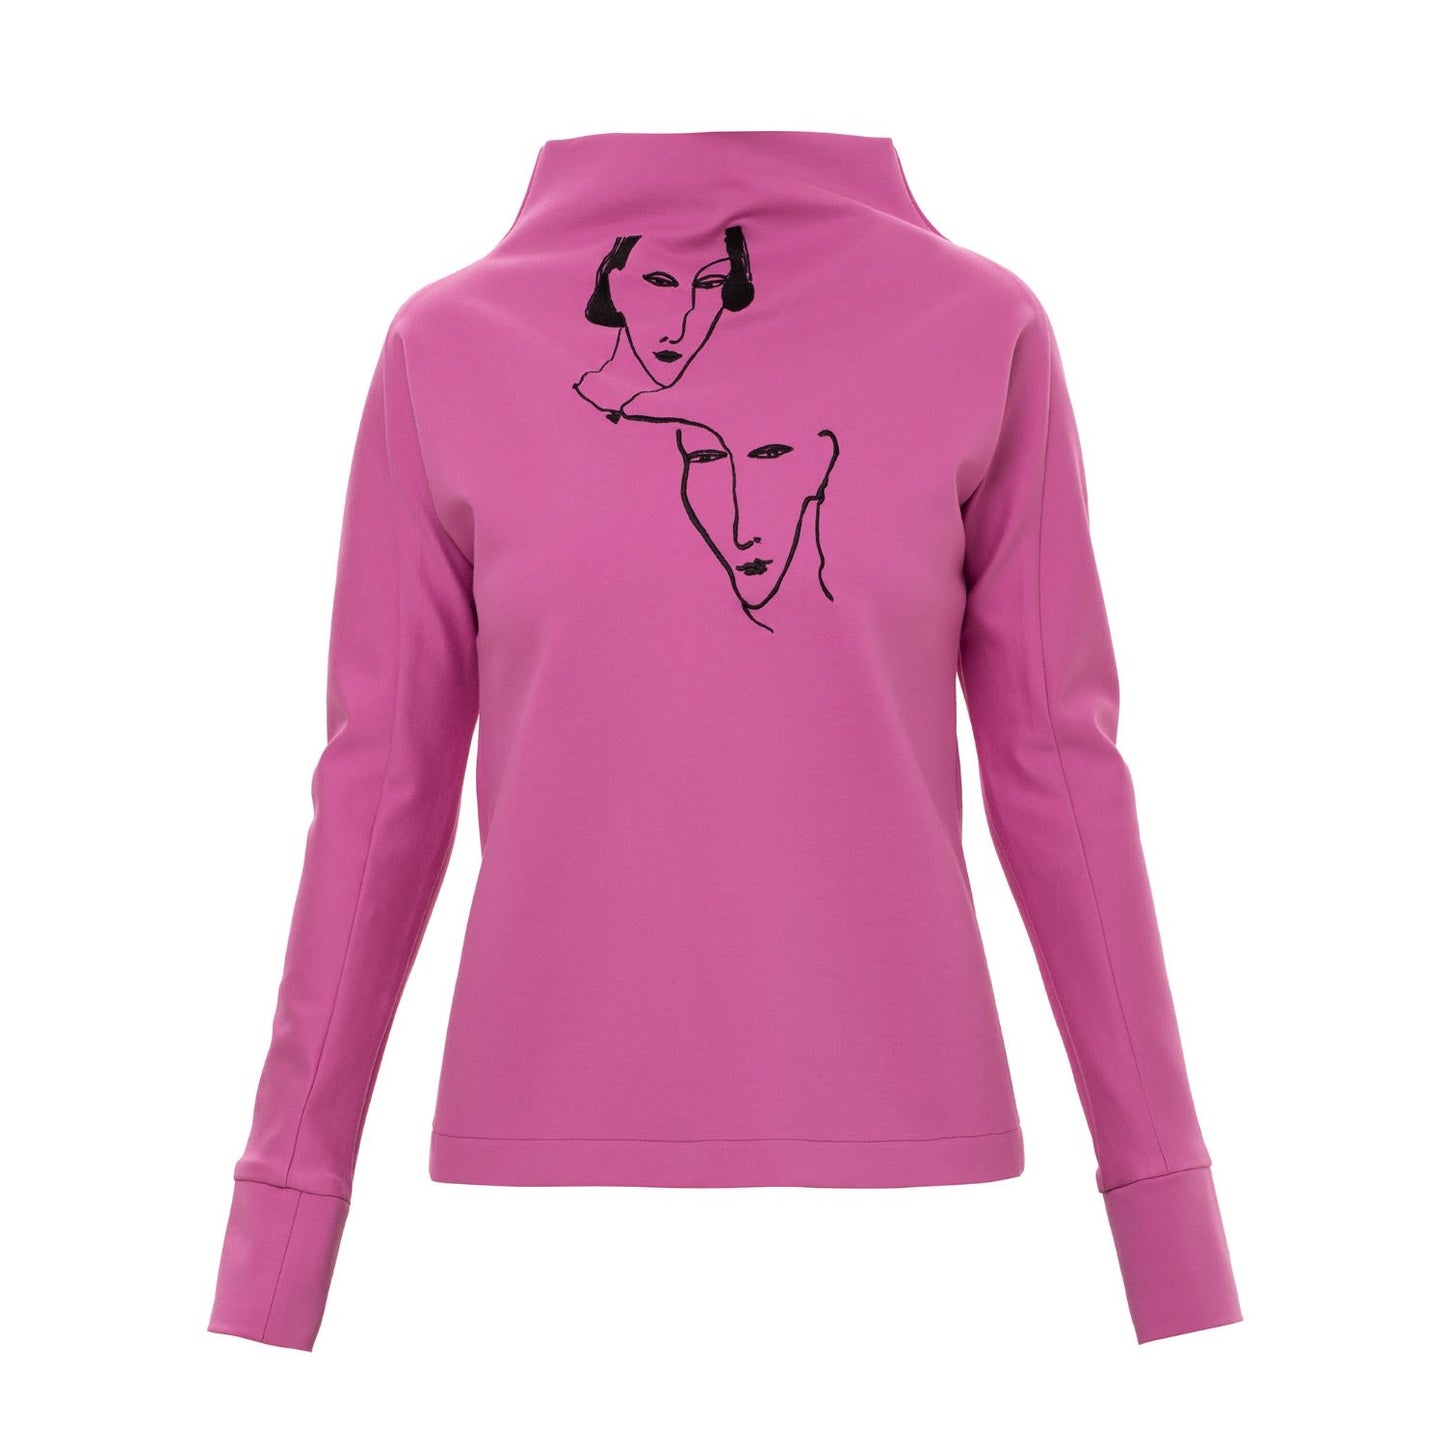 Pink Turtleneck Blouse Jersey With Embroidery